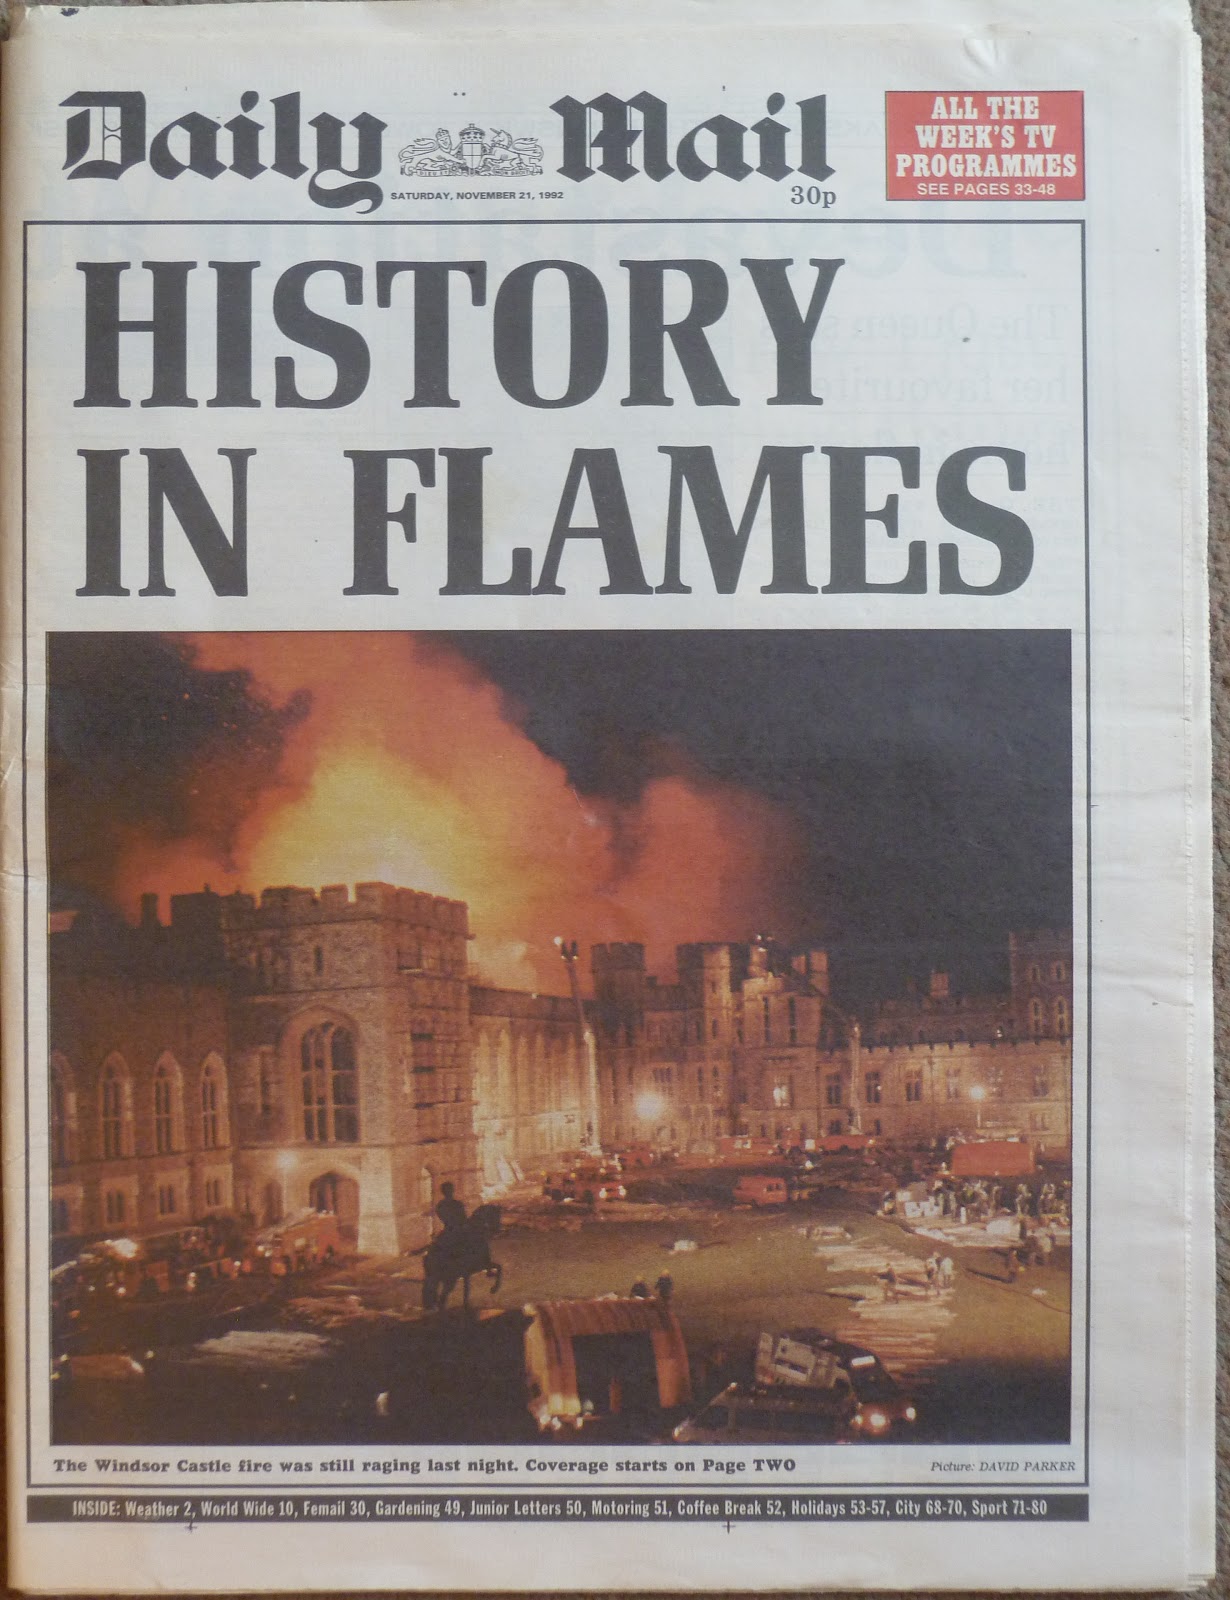 Daily Mail covered the Castle fire